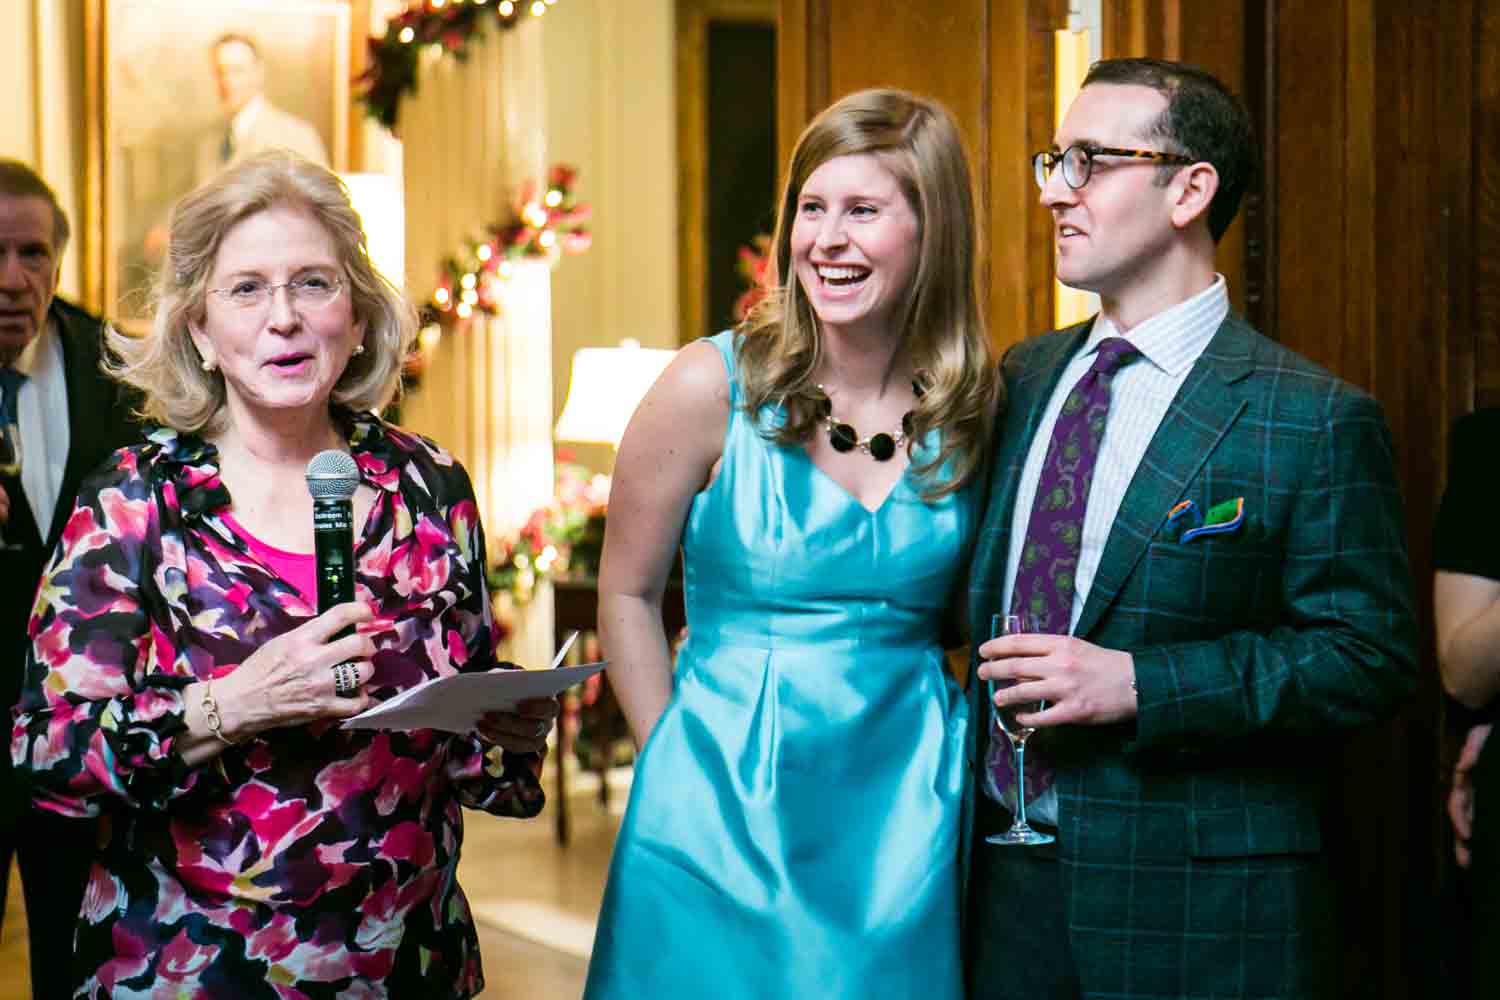 Mother of the groom making a speech in front of couple at a Lotos Club engagement party